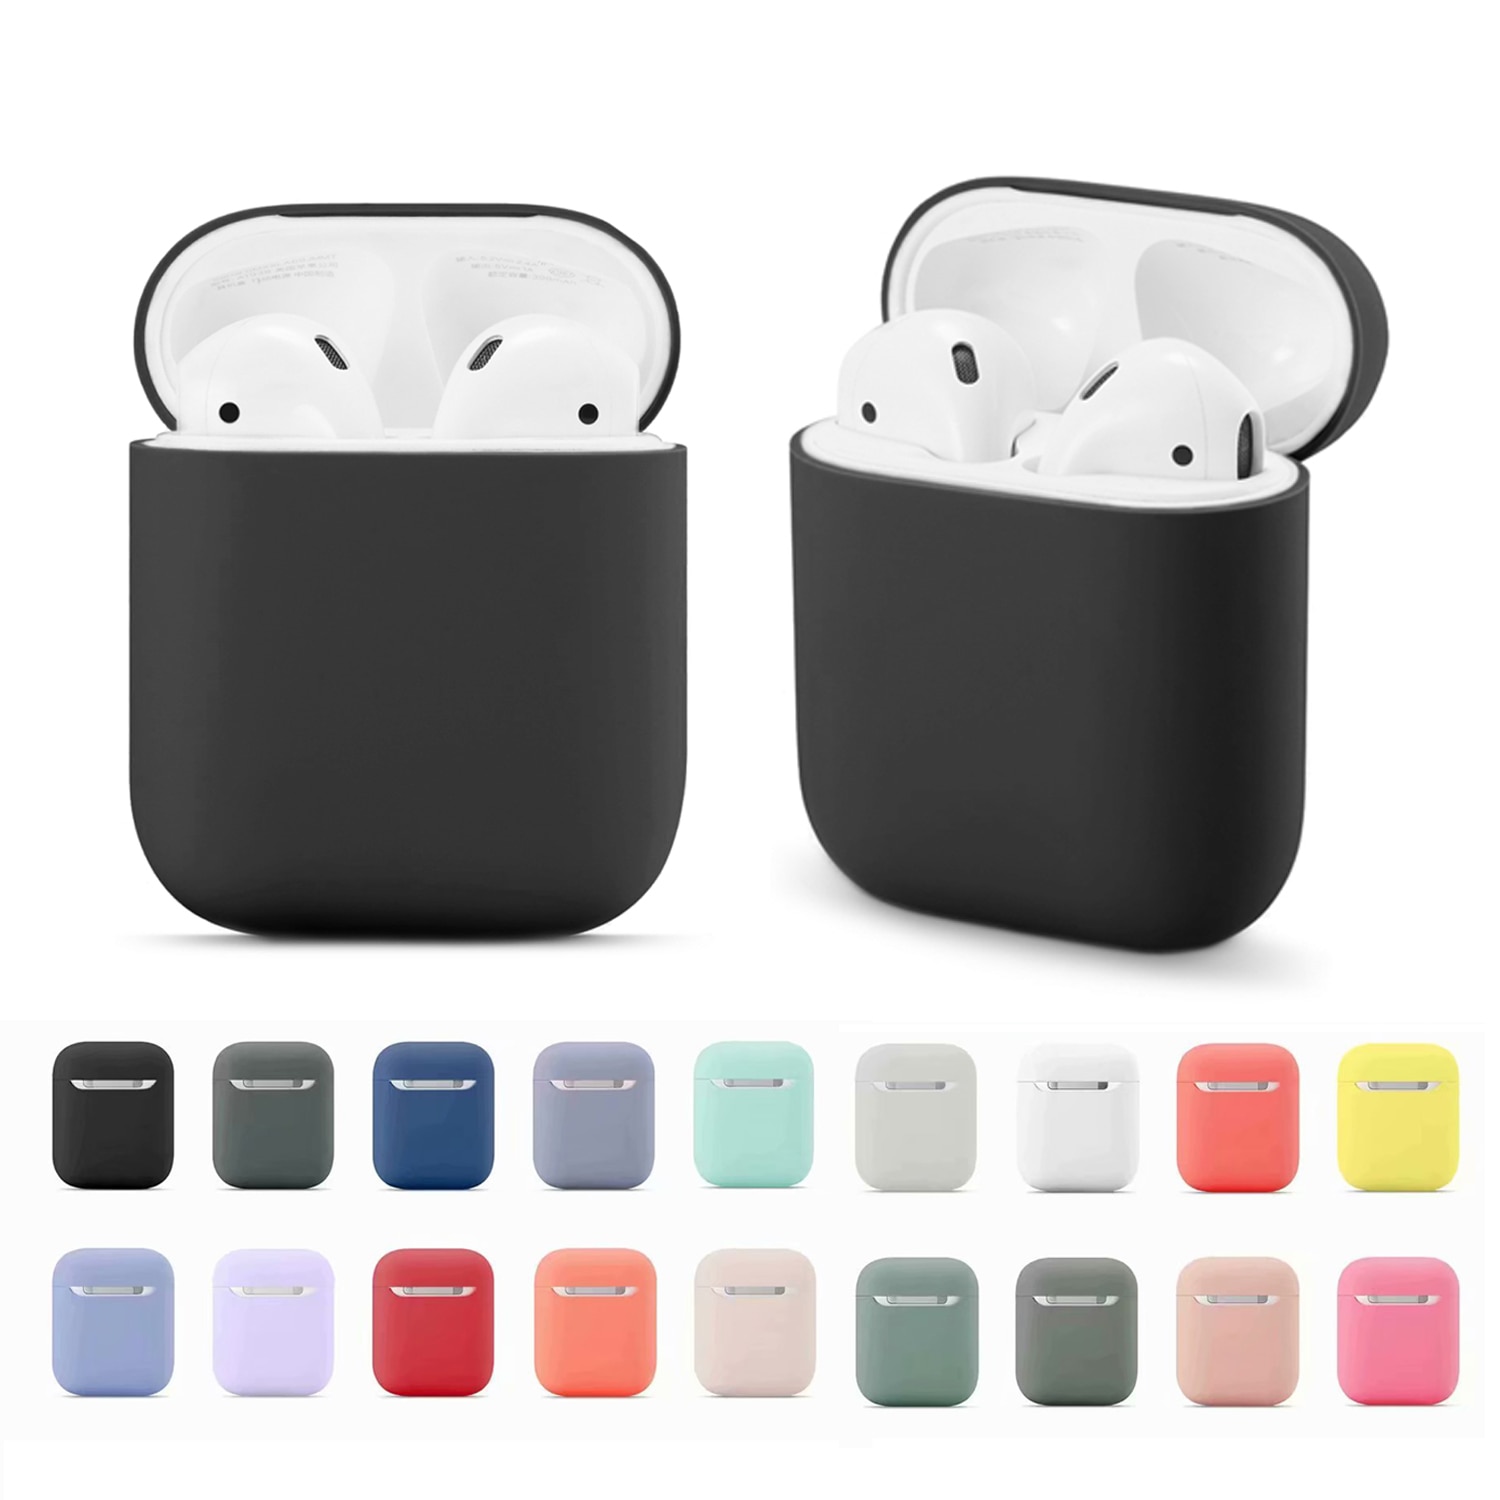 Soft silicone case for Apple Airpods